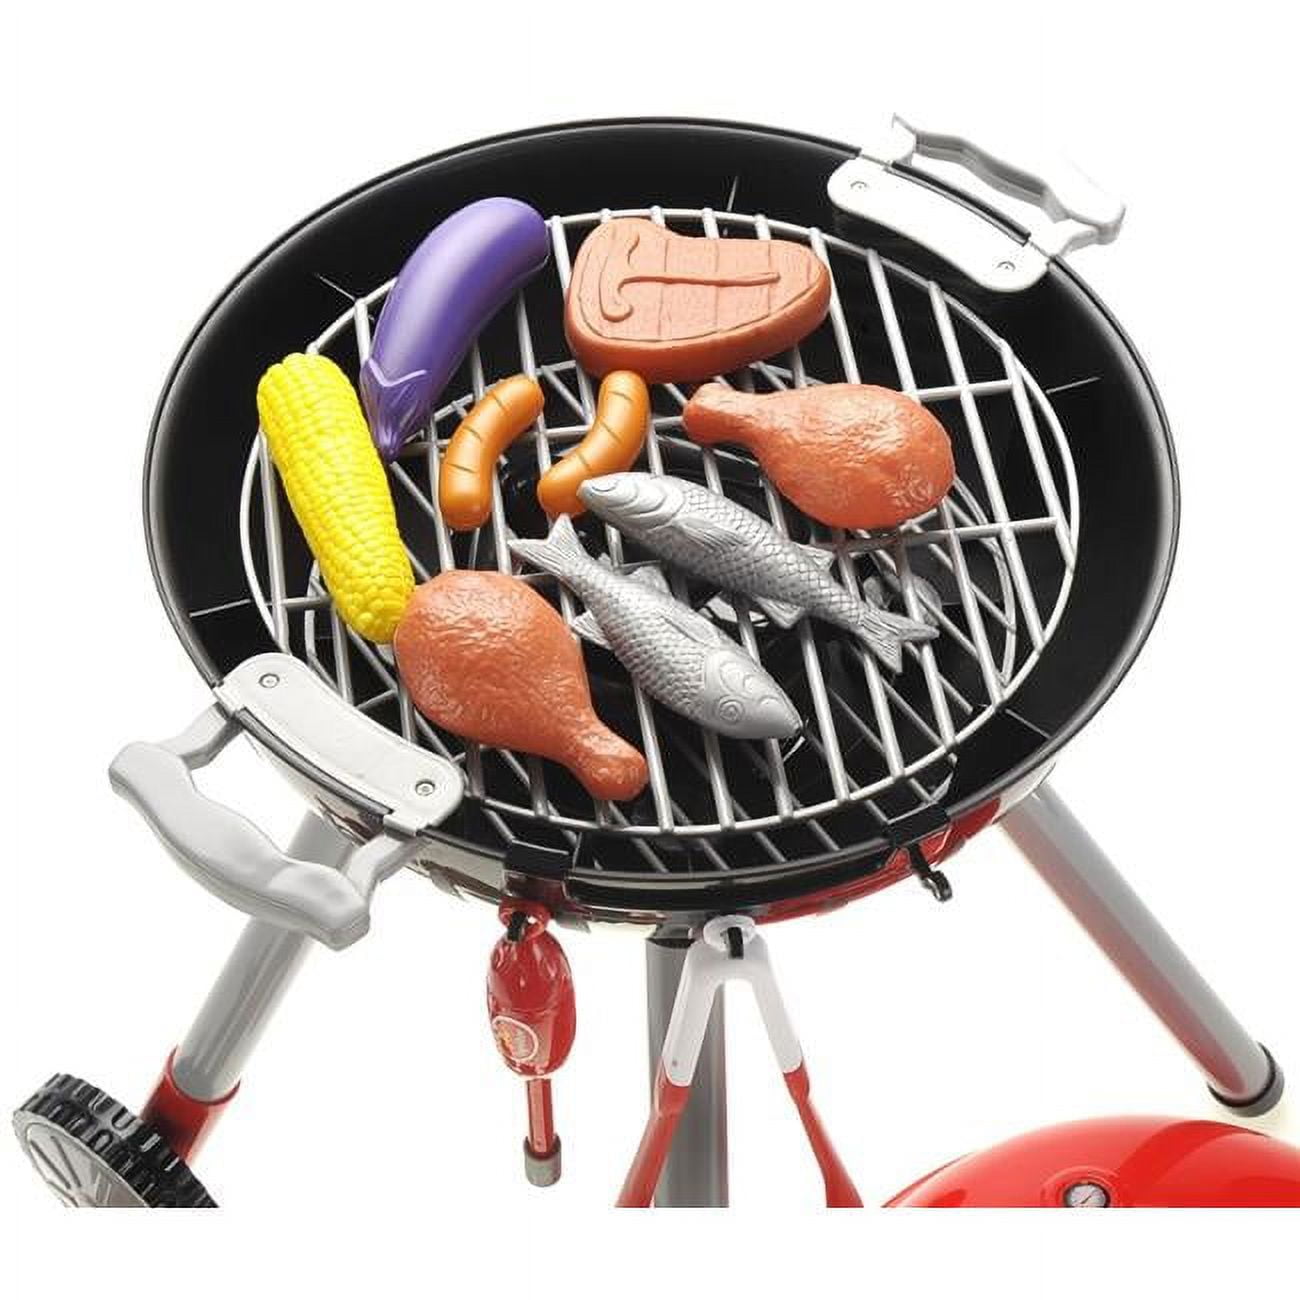 Picture of Azimport PS01A BBQ Grill Play Set Toy